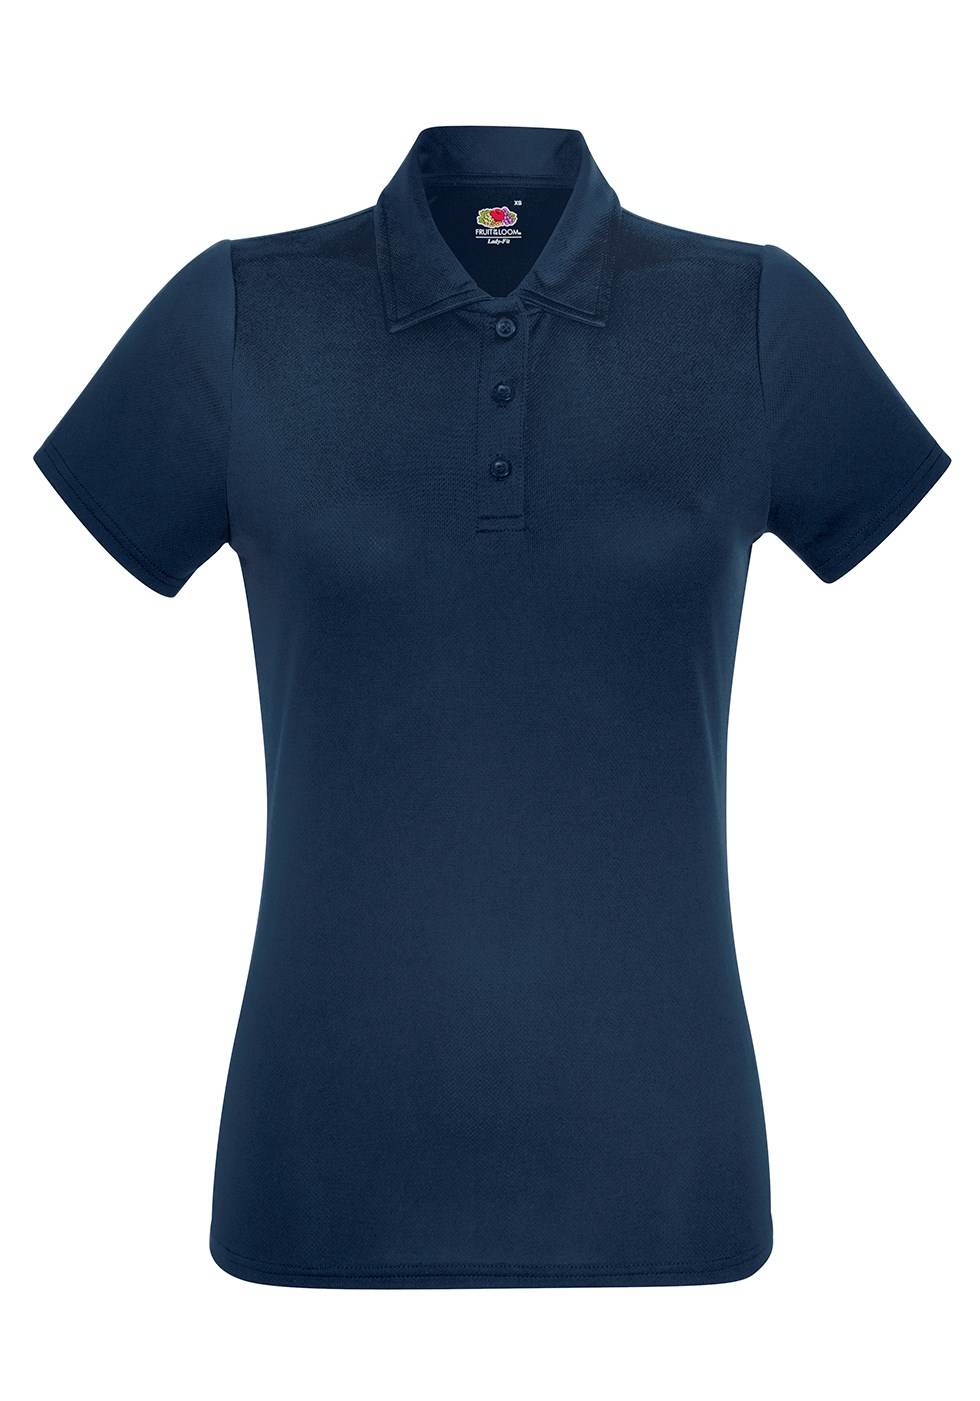 Navy Navy T-shirt Performance PoloFruit of the Loom